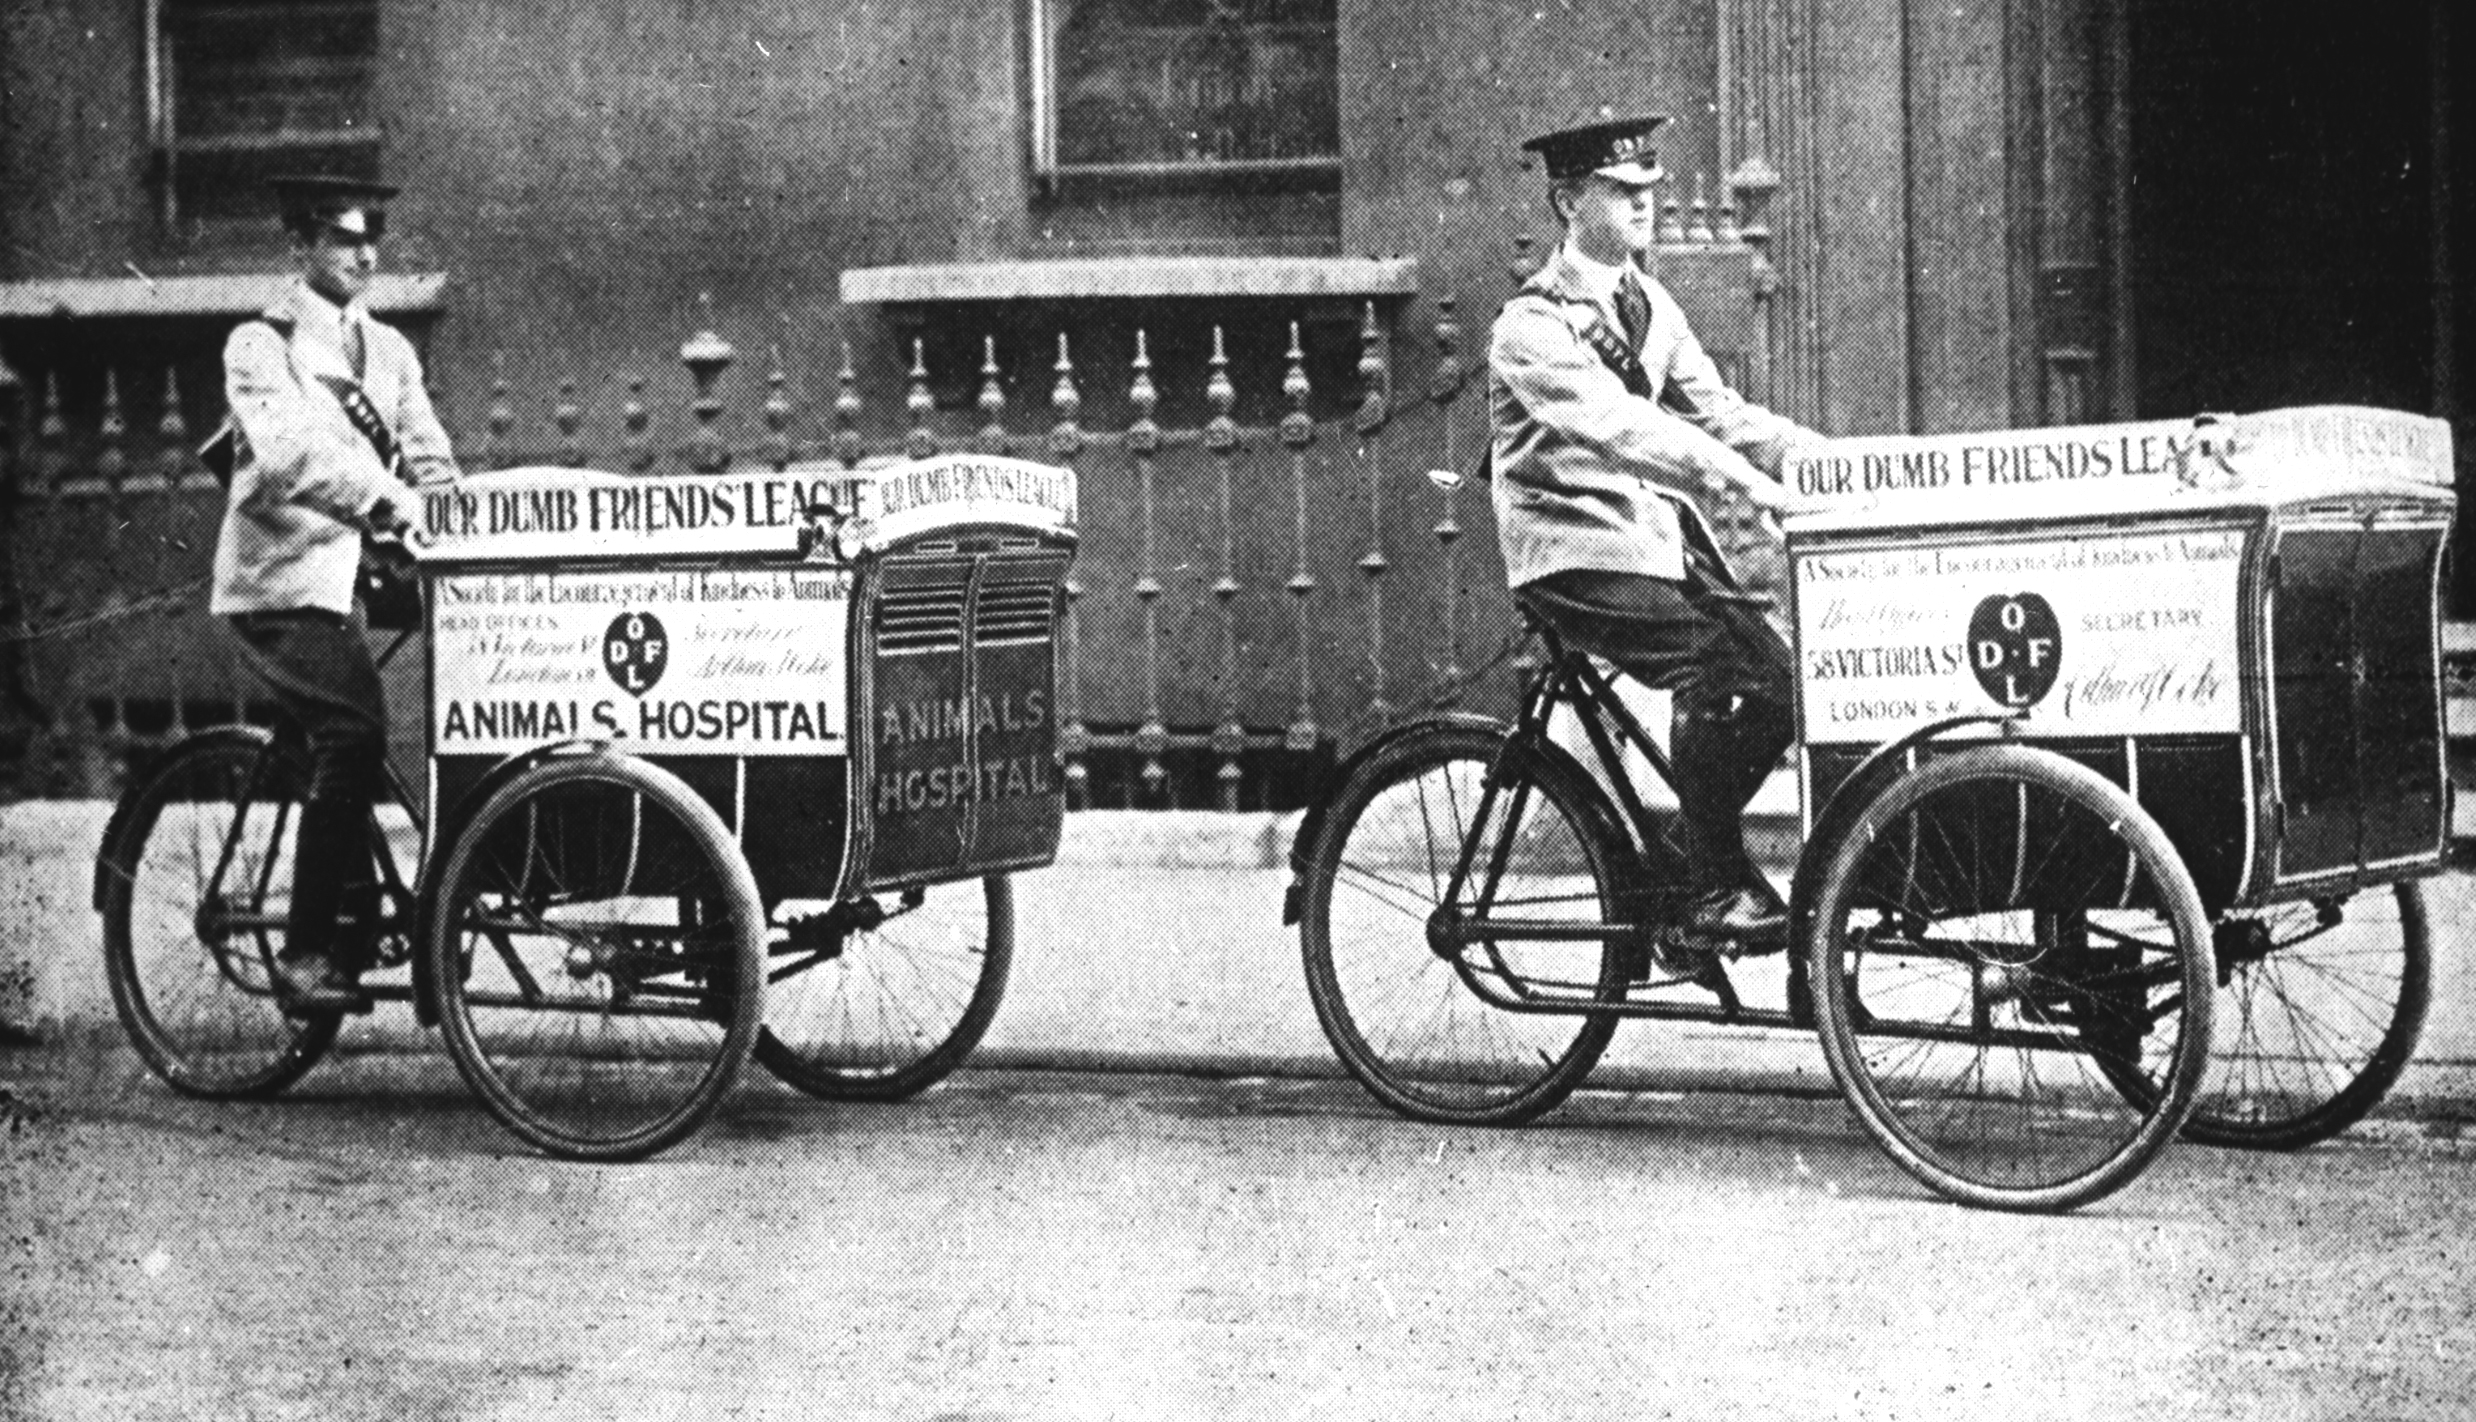 A historic black and white image of two men cycling small animal ambulances